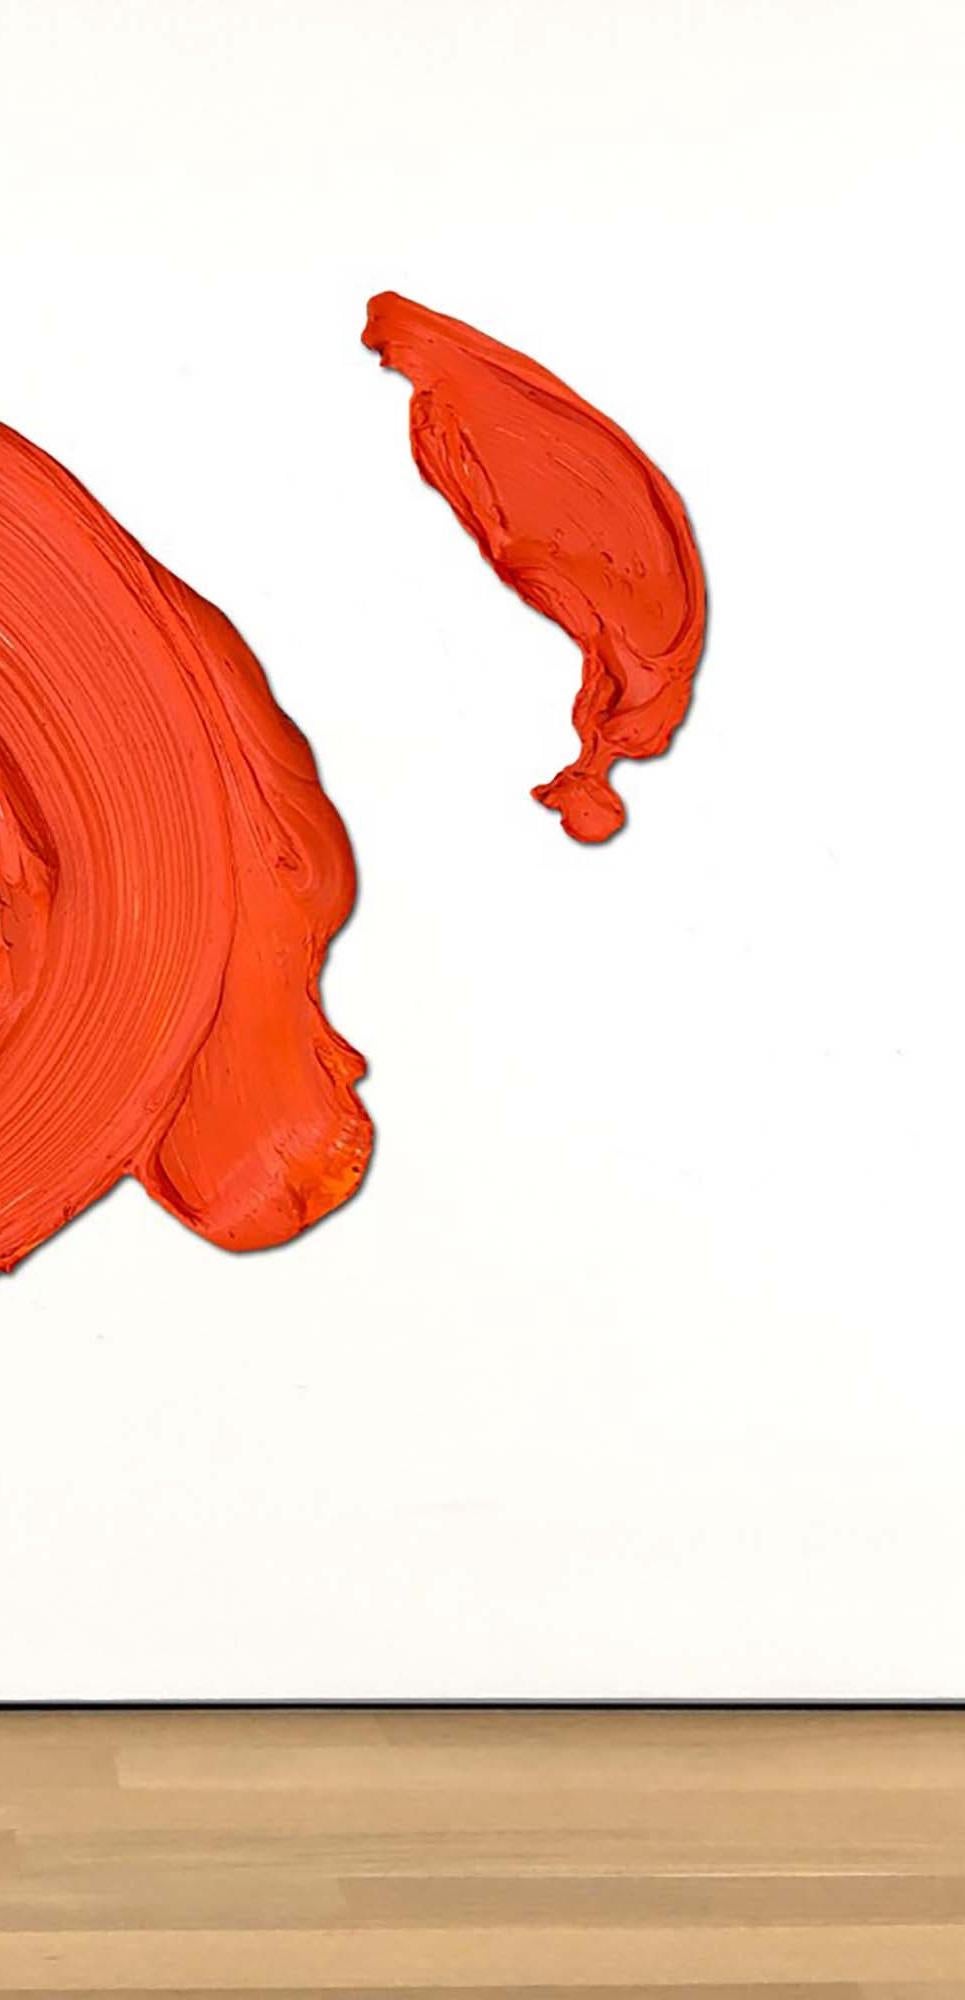 Zbo - Abstract Painting by Donald Martiny